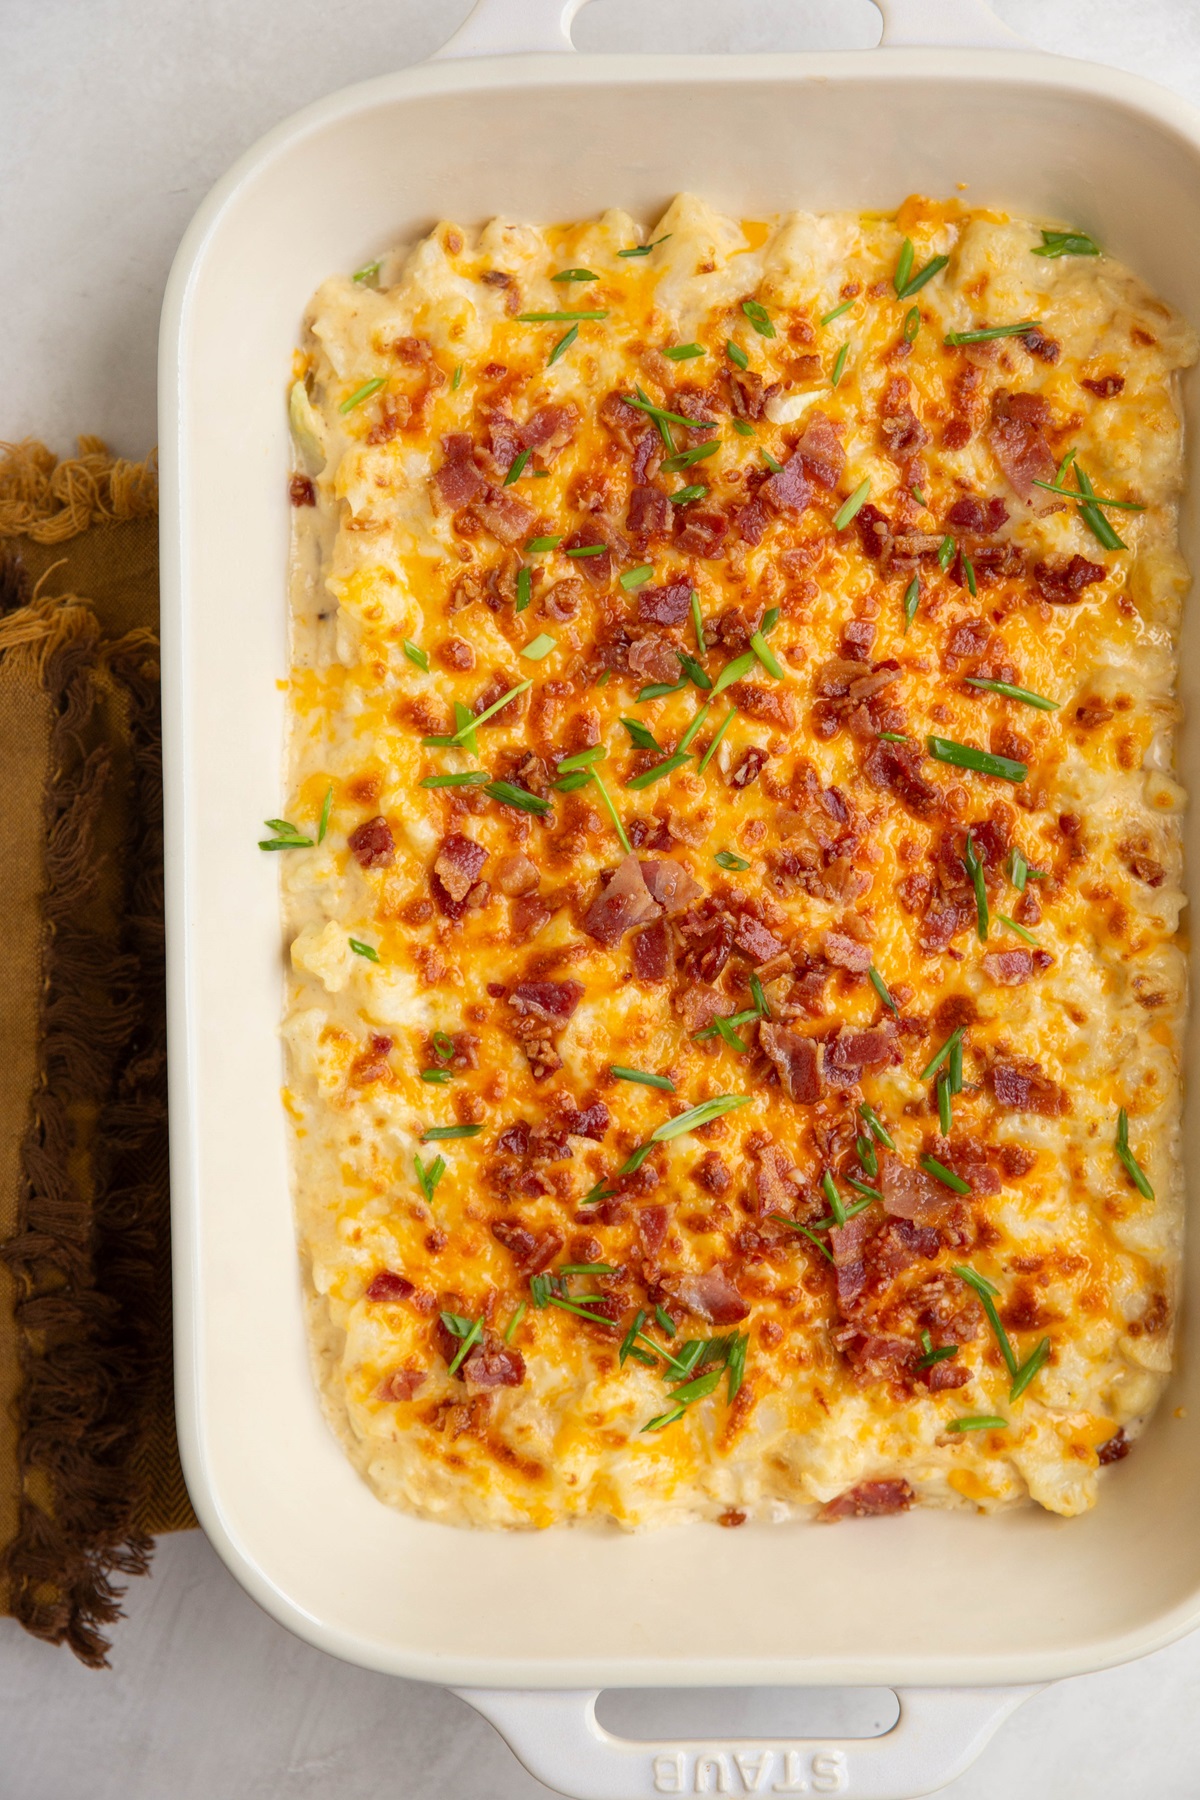 Casserole dish of baked cauliflower mac and cheese with chives and bacon sprinkled on top.